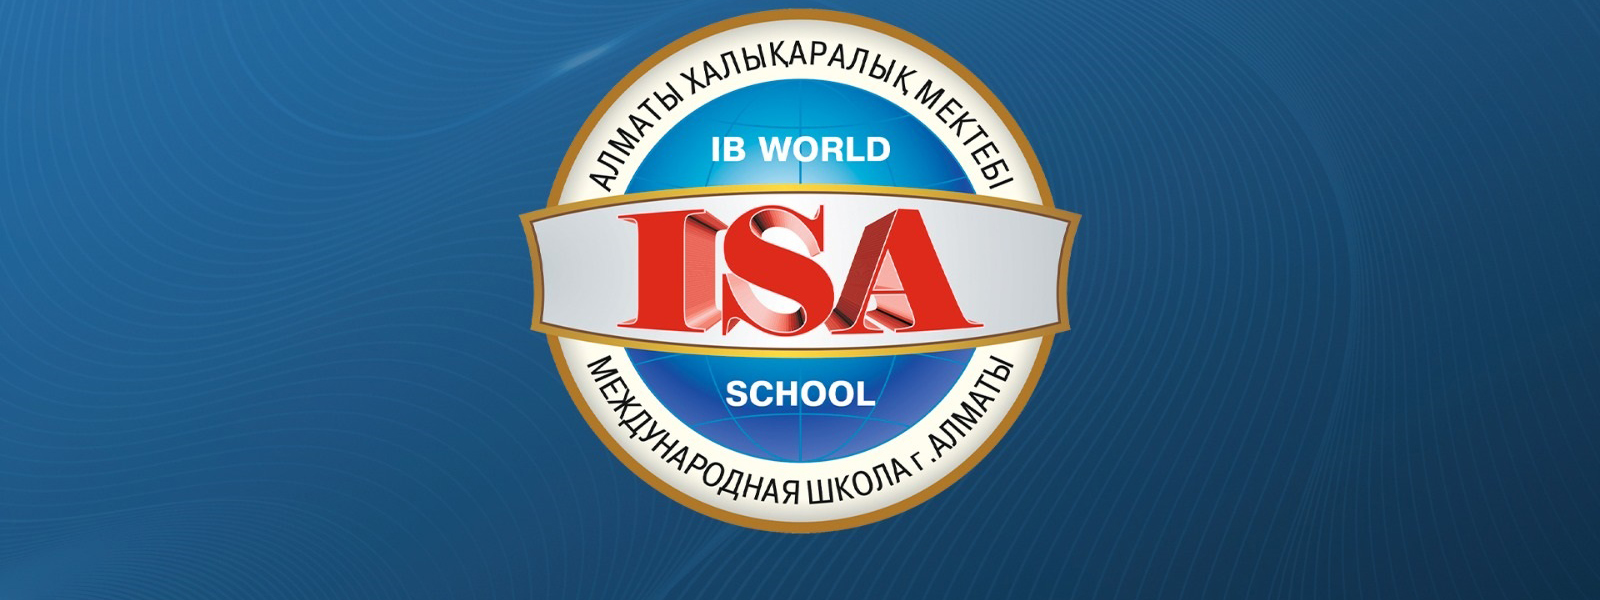 Dear students, parents, and staff of the International School of Almaty!